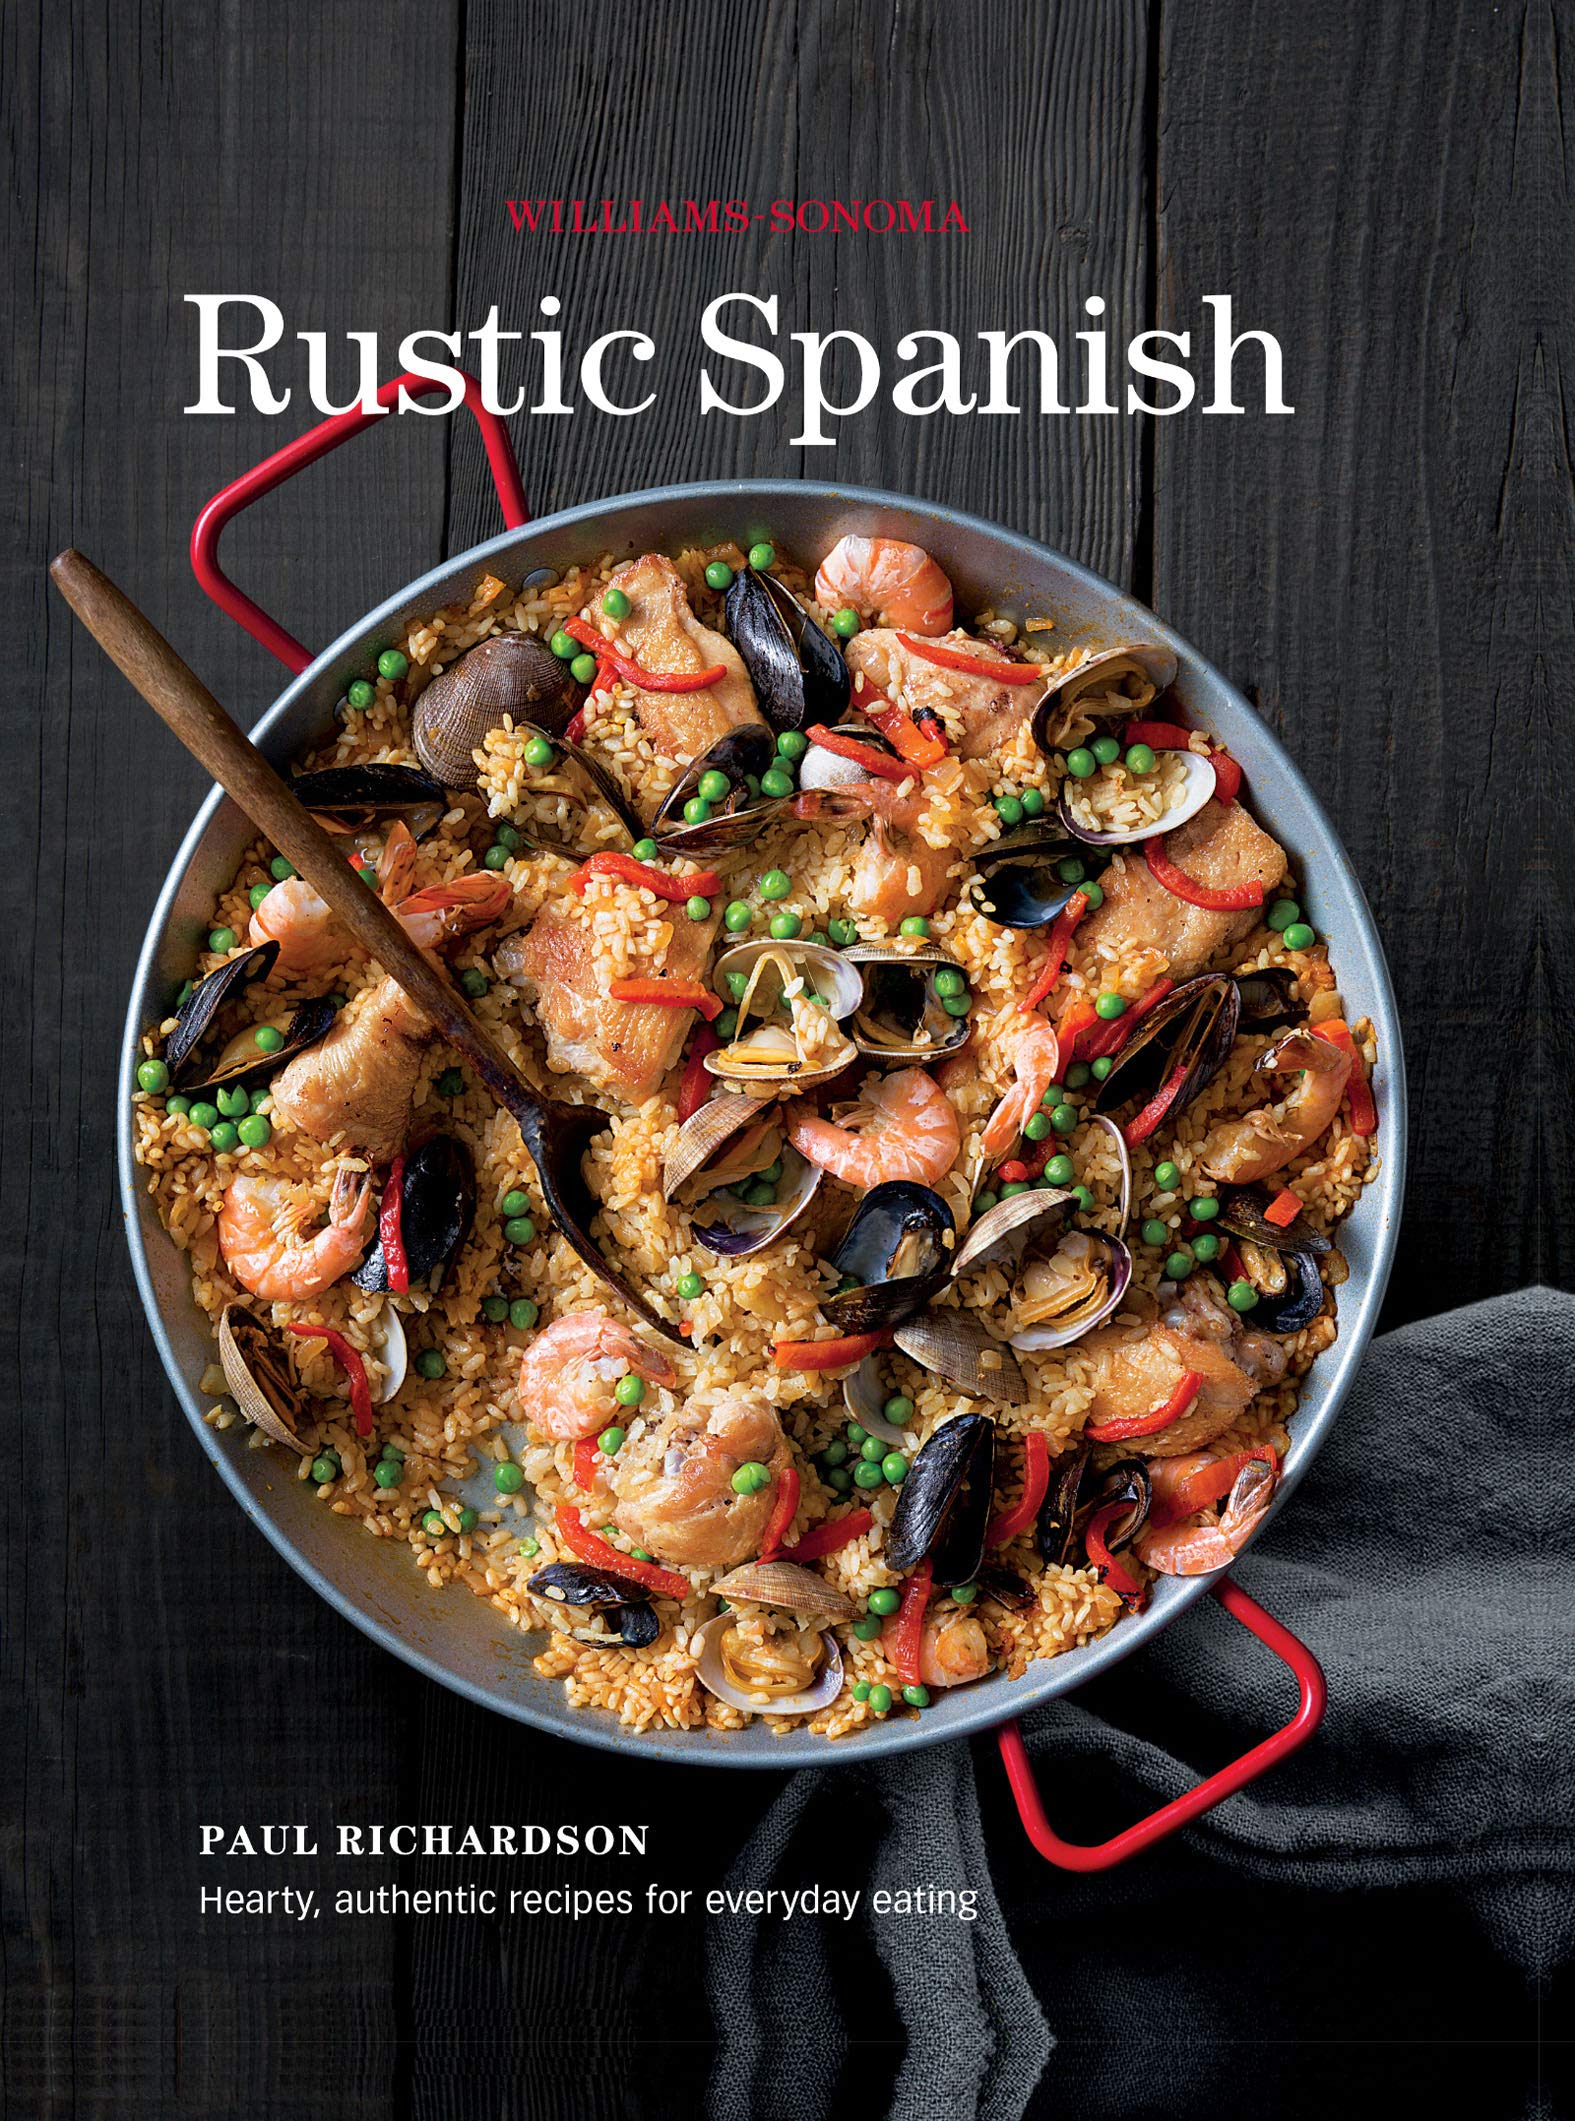 Rustic Spanish: Hearty, Authentic Recipes for Everyday Eating (Williams-Sonoma)